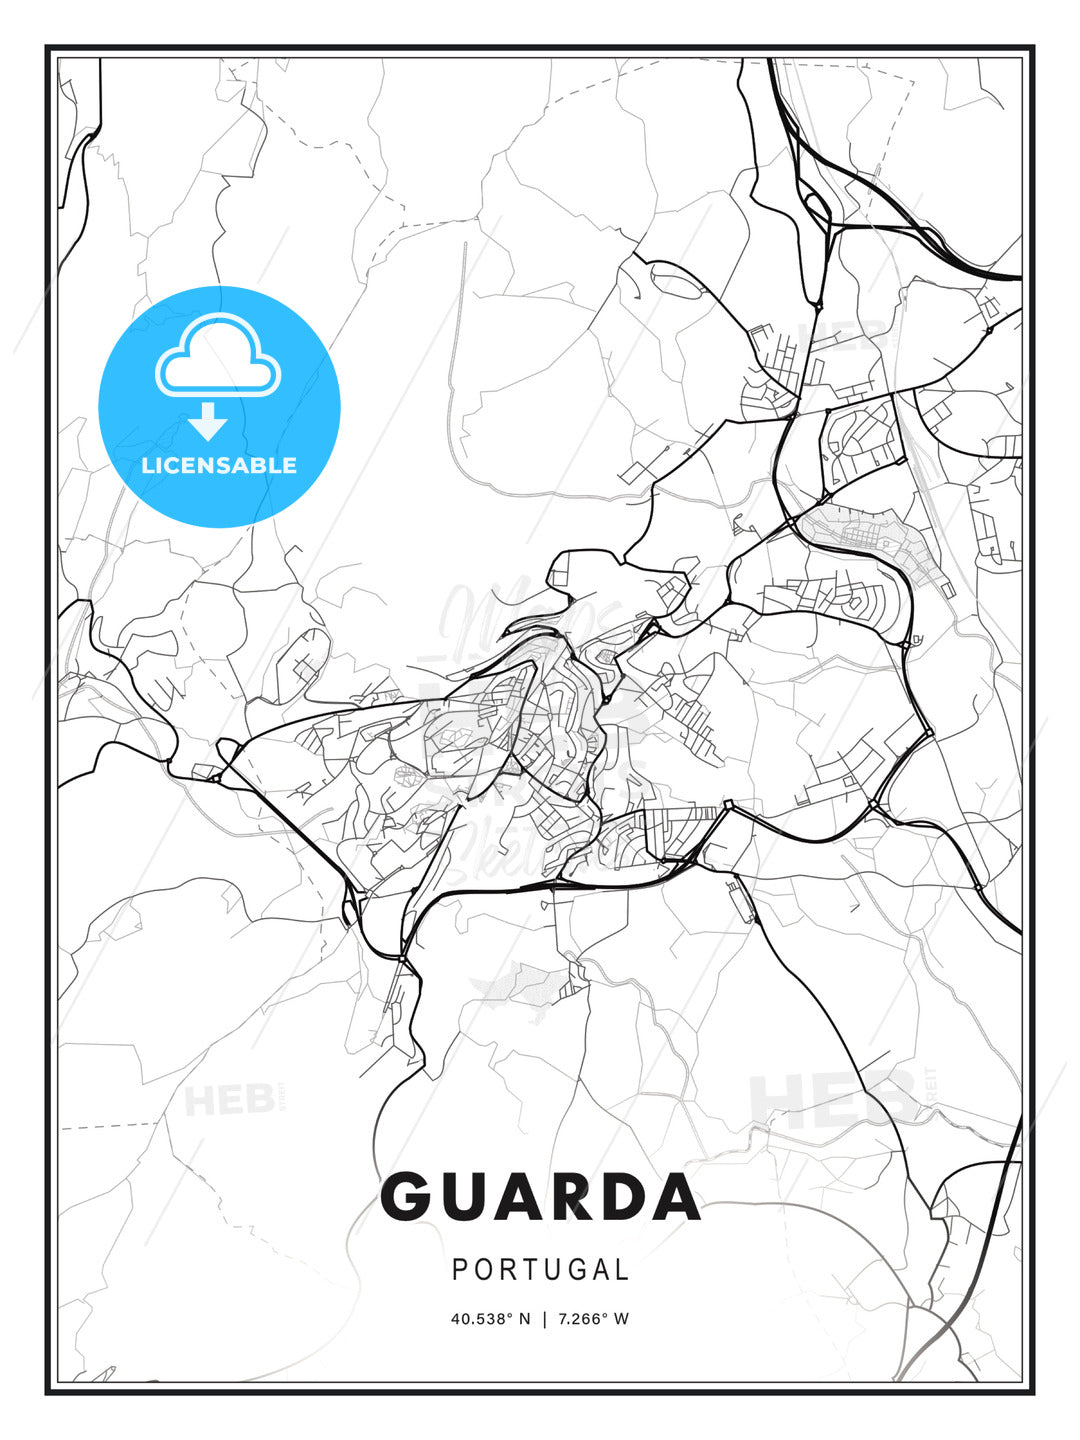 Guarda, Portugal, Modern Print Template in Various Formats - HEBSTREITS Sketches